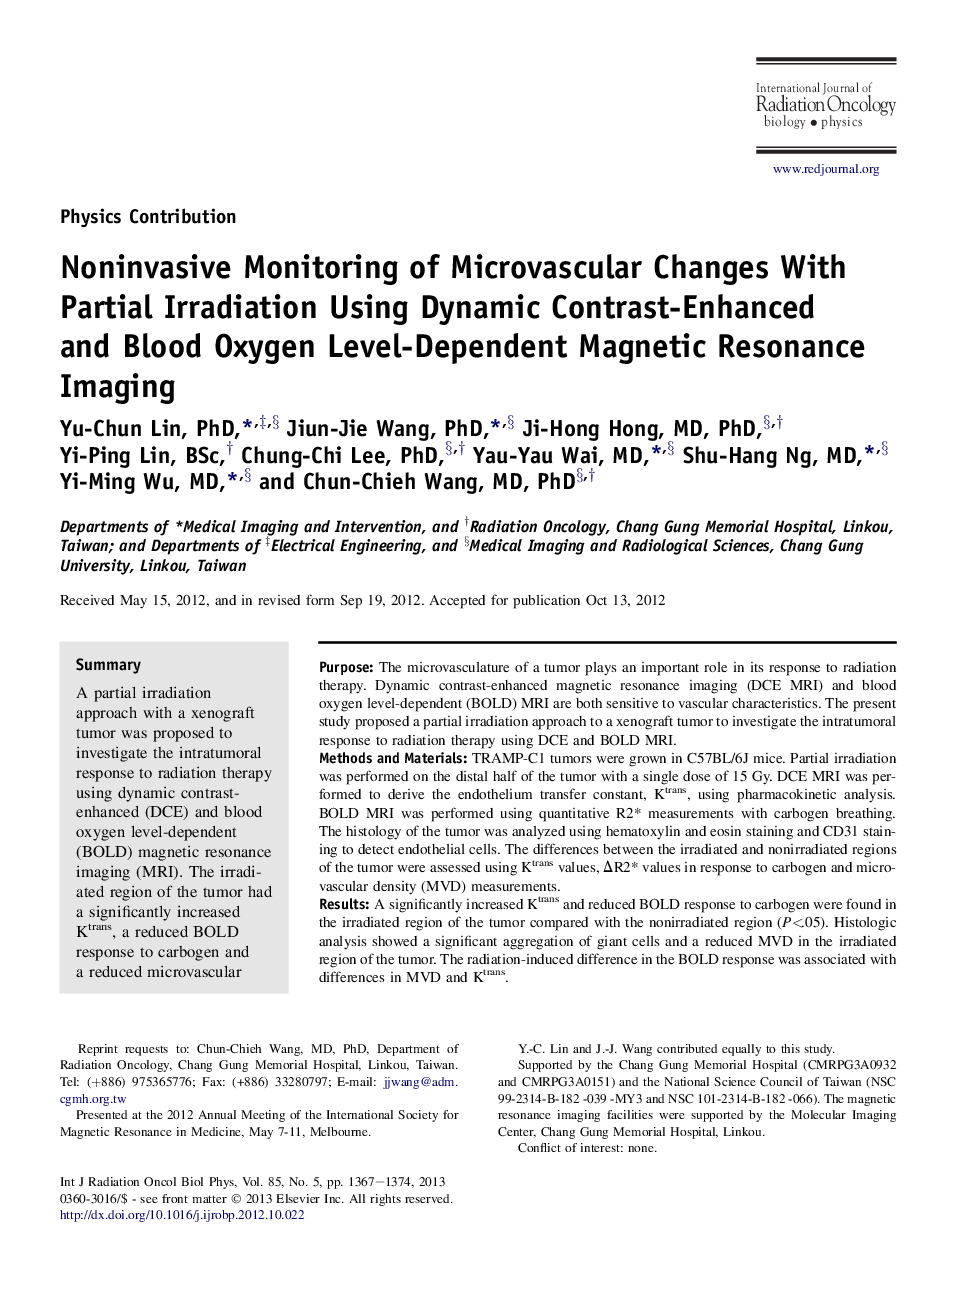 Noninvasive Monitoring of Microvascular Changes With Partial Irradiation Using Dynamic Contrast-Enhanced and Blood Oxygen Level-Dependent Magnetic Resonance Imaging